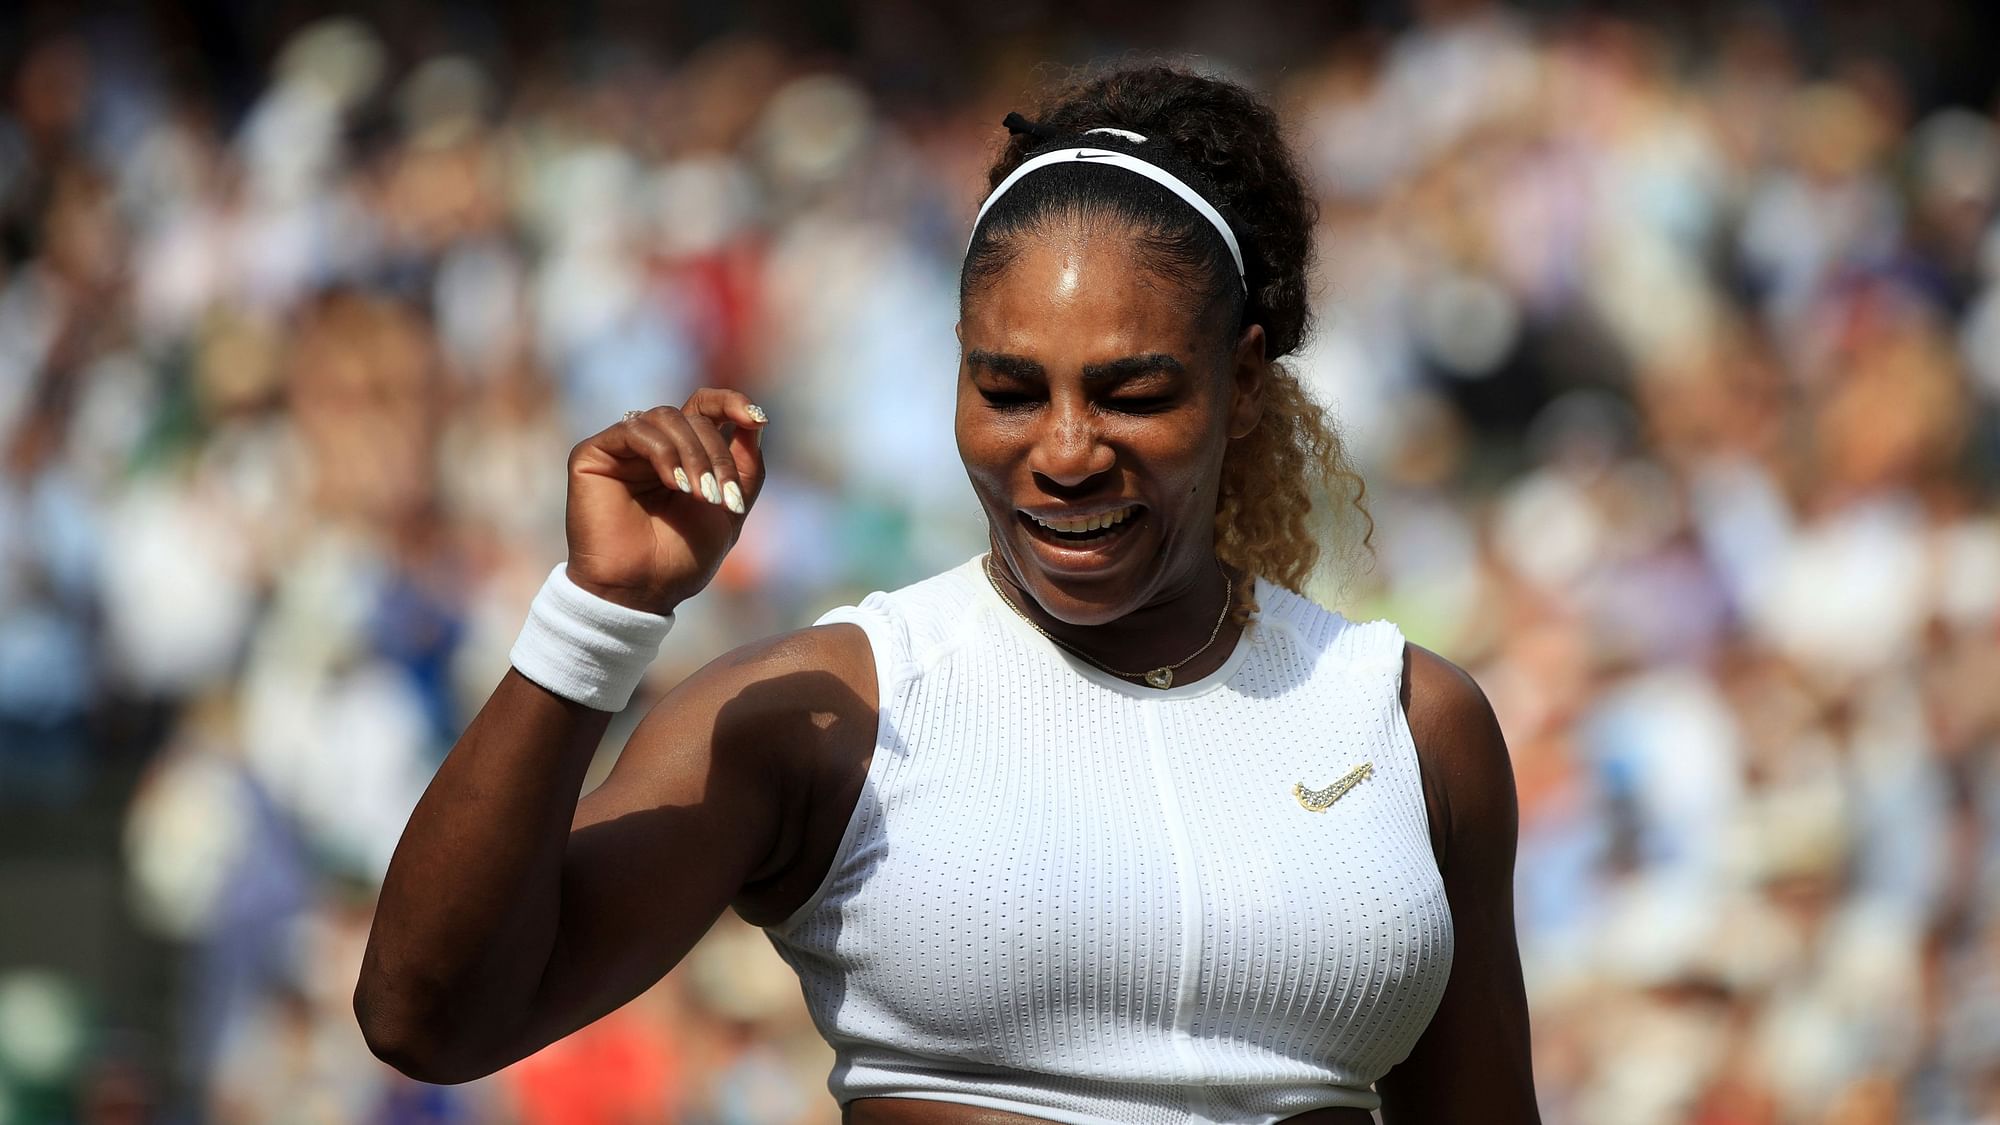 Serena Williams is playing Simona Halep in the final of the Wimbledon.